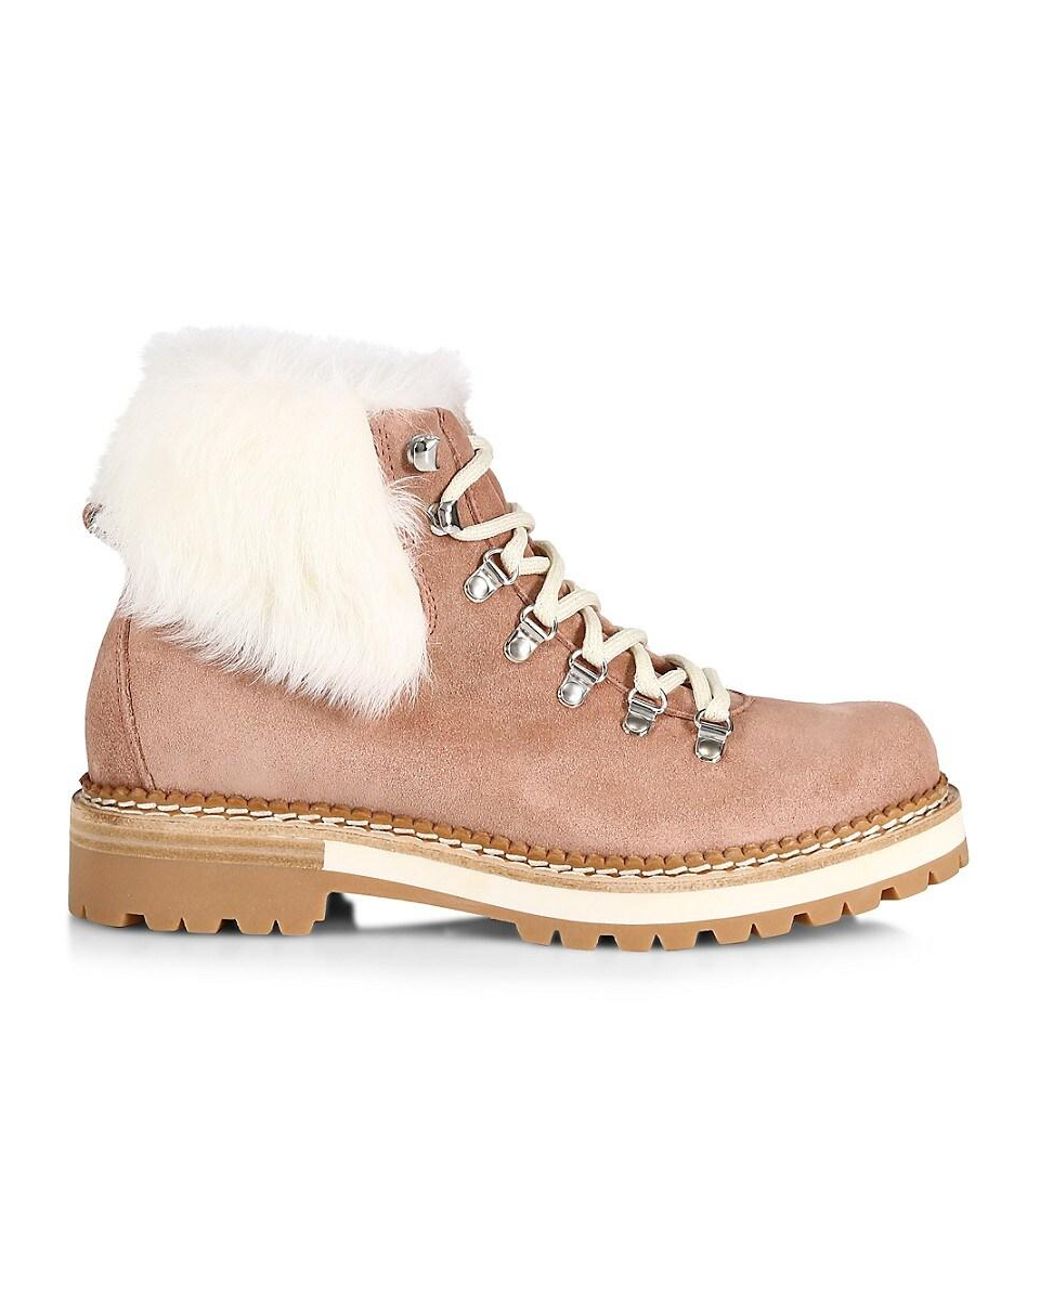 Montelliana 1965 Clara Suede Shearling-trimmed Hiking Boots in Natural ...